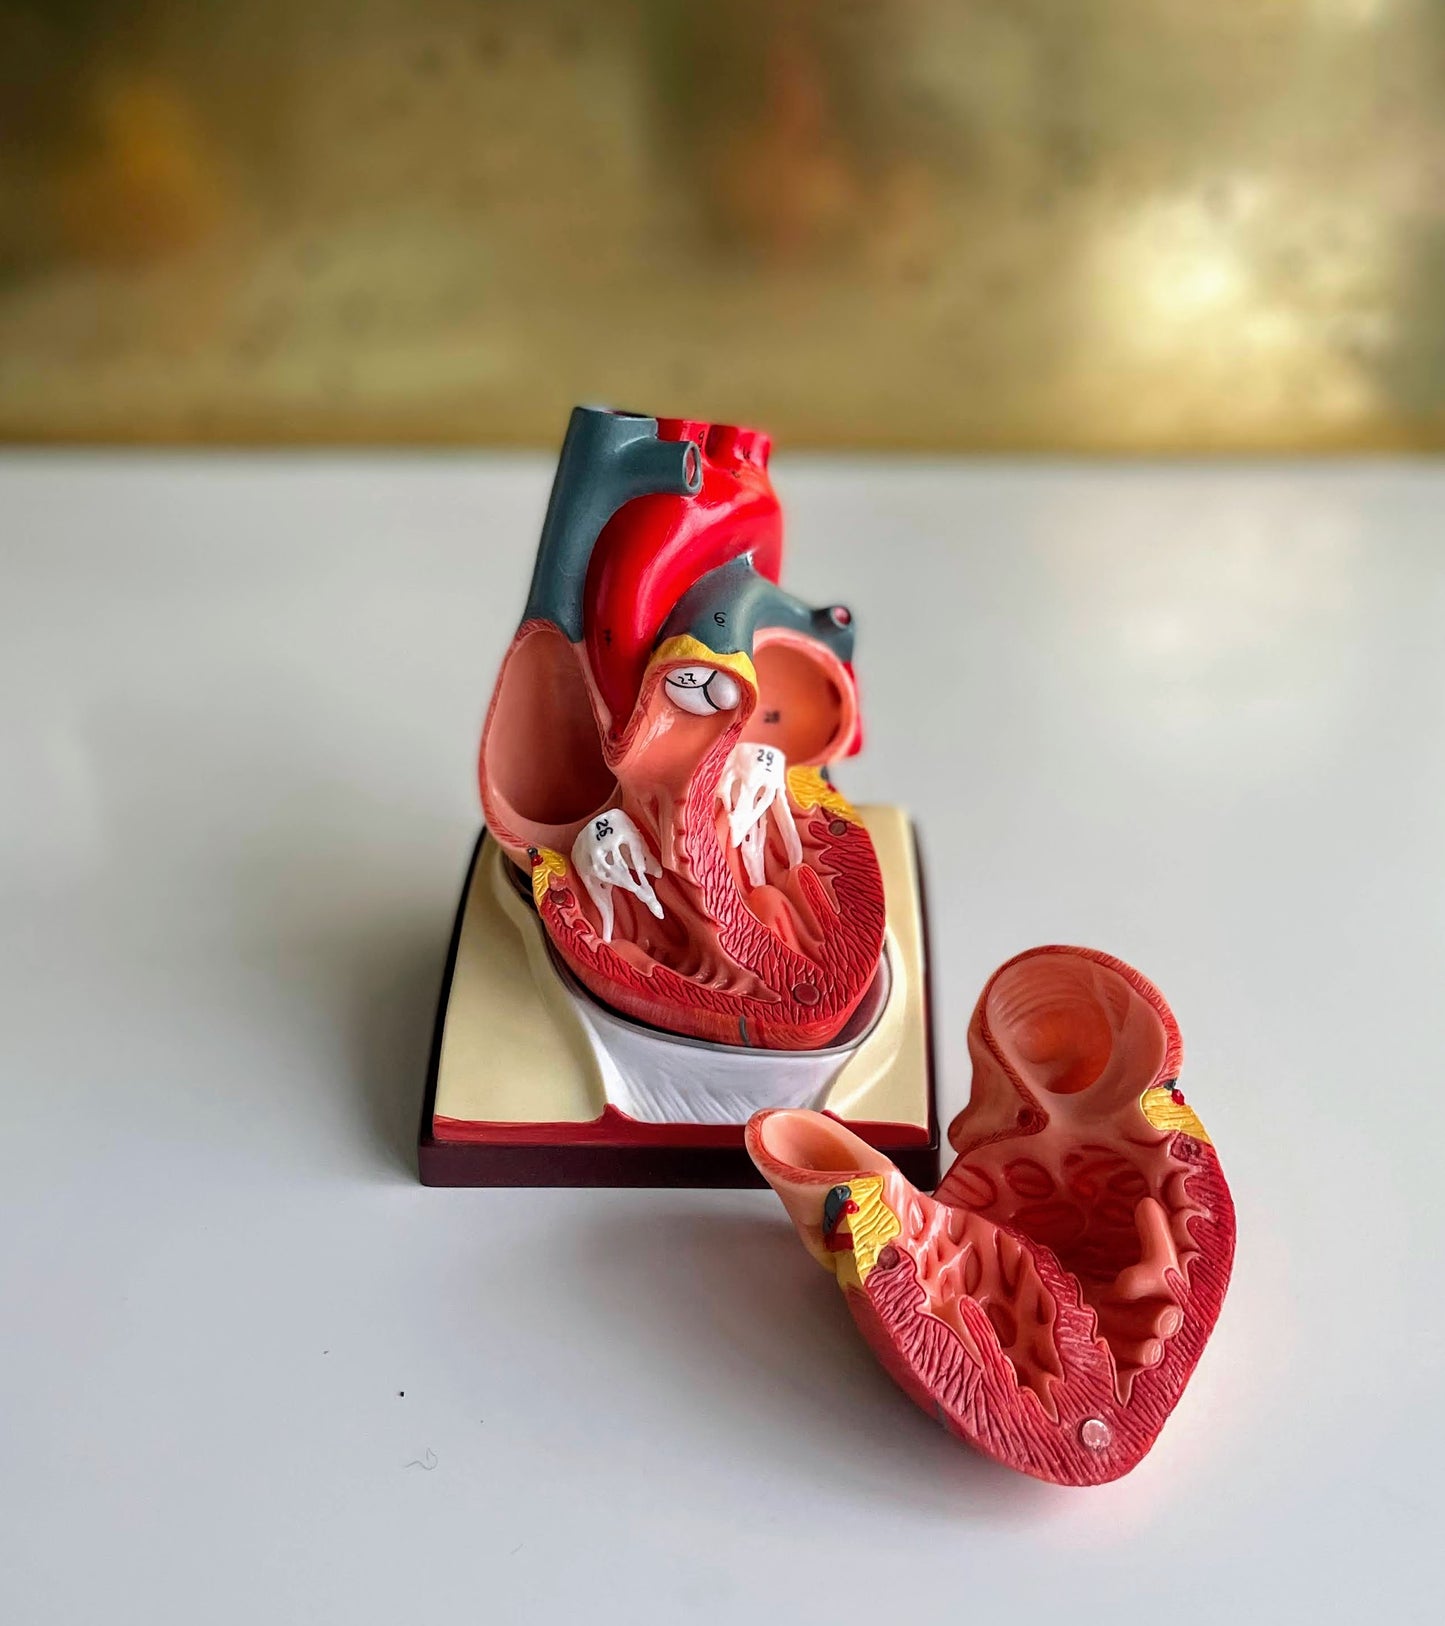 Heart model in high quality on a base that includes shows the pericardium